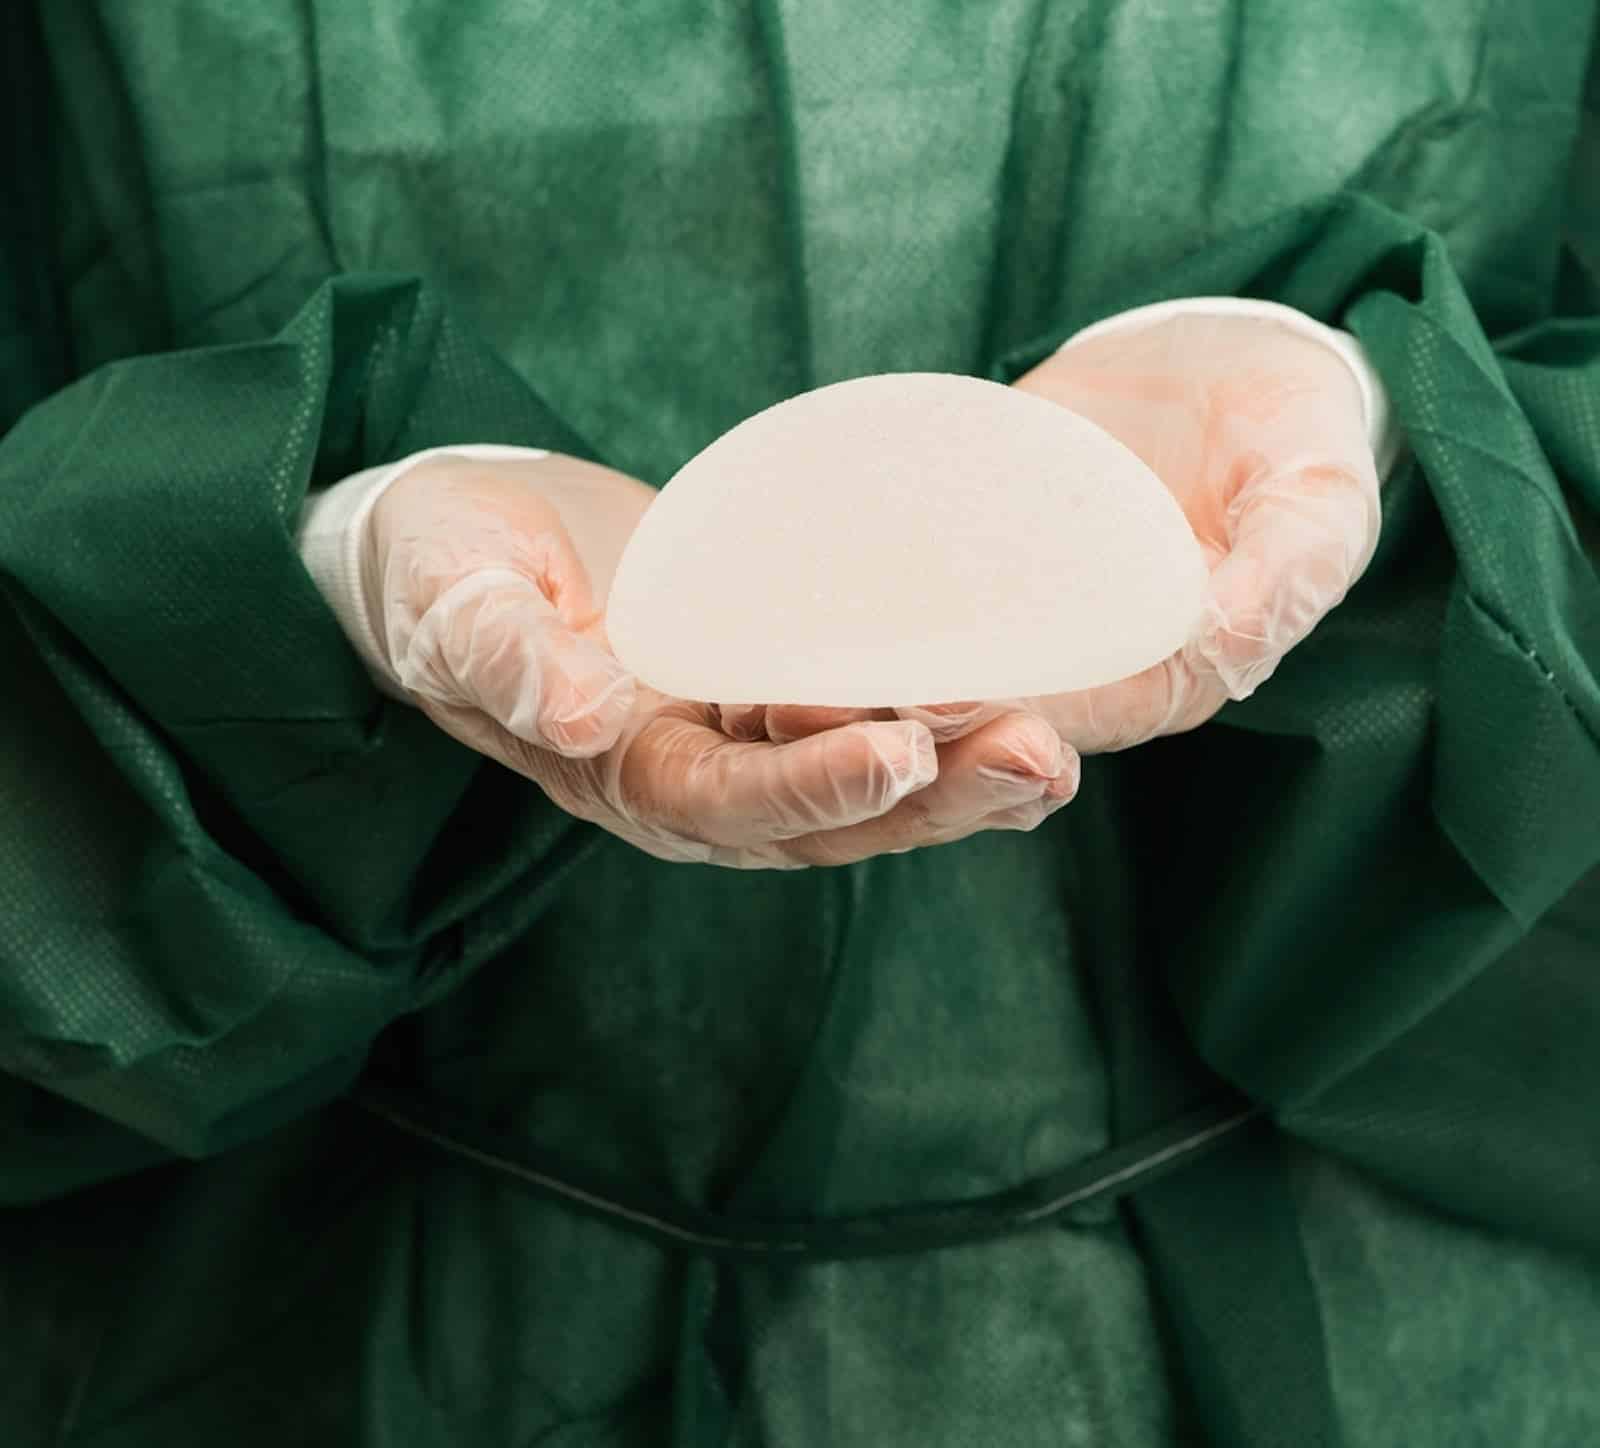 Breast Implants Have Been Linked To A Rare Cancer In A Major ...